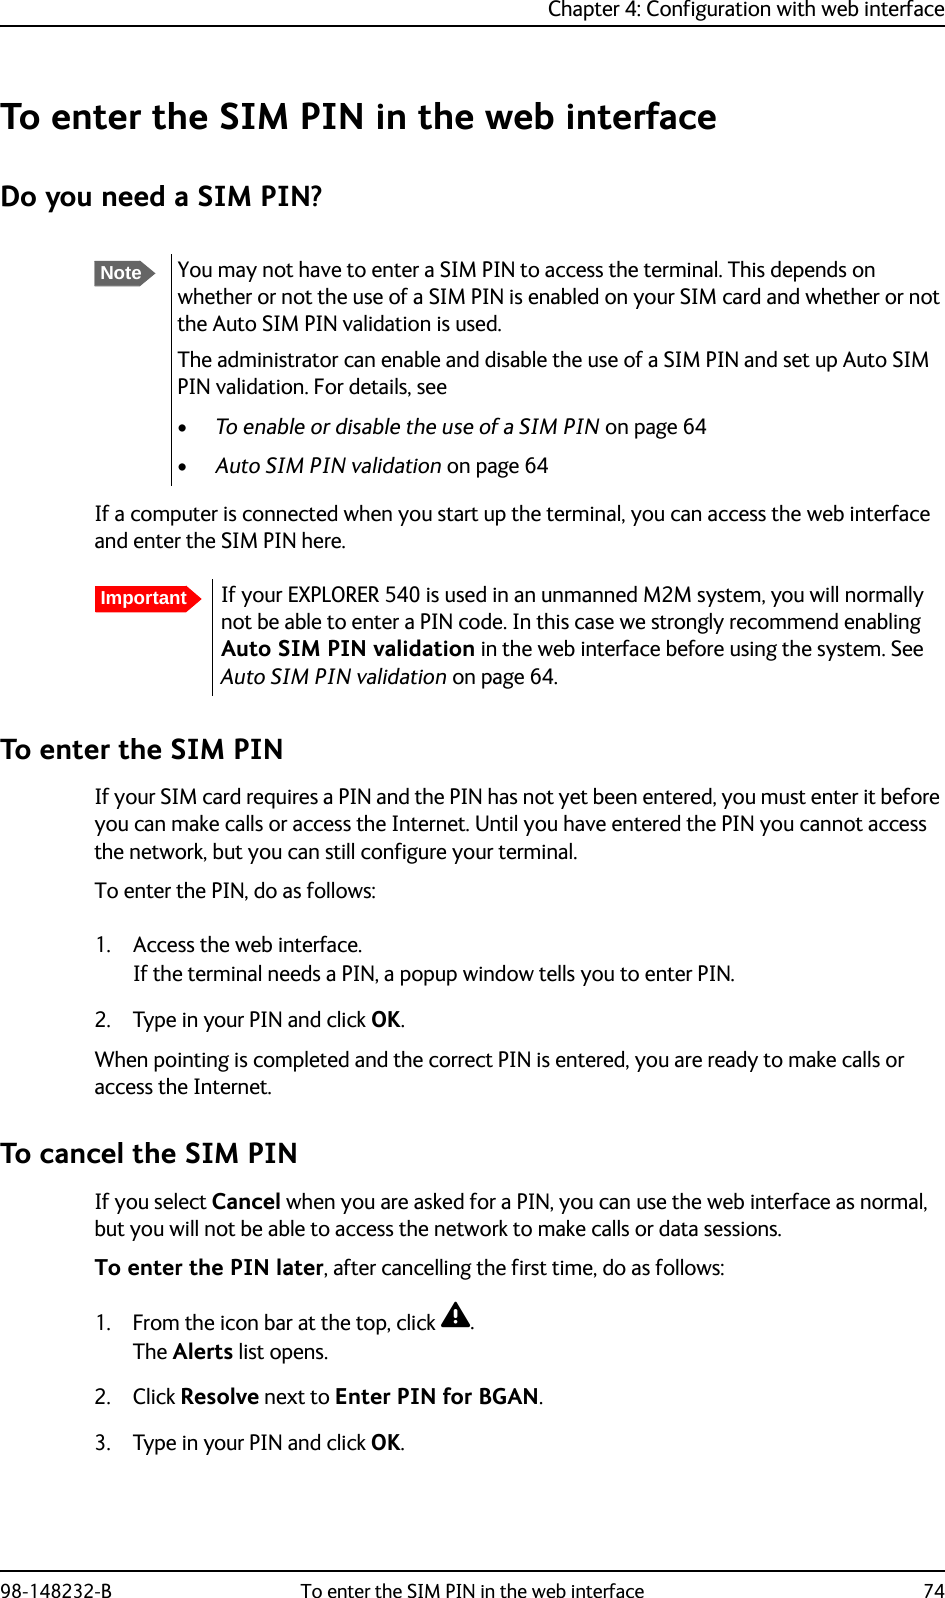 Chapter 4: Configuration with web interface98-148232-B To enter the SIM PIN in the web interface 74To enter the SIM PIN in the web interfaceDo you need a SIM PIN?If a computer is connected when you start up the terminal, you can access the web interface and enter the SIM PIN here.To enter the SIM PINIf your SIM card requires a PIN and the PIN has not yet been entered, you must enter it before you can make calls or access the Internet. Until you have entered the PIN you cannot access the network, but you can still configure your terminal.To enter the PIN, do as follows:1. Access the web interface.If the terminal needs a PIN, a popup window tells you to enter PIN.2. Type in your PIN and click OK.When pointing is completed and the correct PIN is entered, you are ready to make calls or access the Internet.To cancel the SIM PINIf you select Cancel when you are asked for a PIN, you can use the web interface as normal, but you will not be able to access the network to make calls or data sessions.To enter the PIN later, after cancelling the first time, do as follows:1. From the icon bar at the top, click .The Alerts list opens.2. Click Resolve next to Enter PIN for BGAN.3. Type in your PIN and click OK.NoteYou may not have to enter a SIM PIN to access the terminal. This depends on whether or not the use of a SIM PIN is enabled on your SIM card and whether or not the Auto SIM PIN validation is used. The administrator can enable and disable the use of a SIM PIN and set up Auto SIM PIN validation. For details, see •To enable or disable the use of a SIM PIN on page 64•Auto SIM PIN validation on page 64ImportantIf your EXPLORER 540 is used in an unmanned M2M system, you will normally not be able to enter a PIN code. In this case we strongly recommend enabling Auto SIM PIN validation in the web interface before using the system. See Auto SIM PIN validation on page 64.